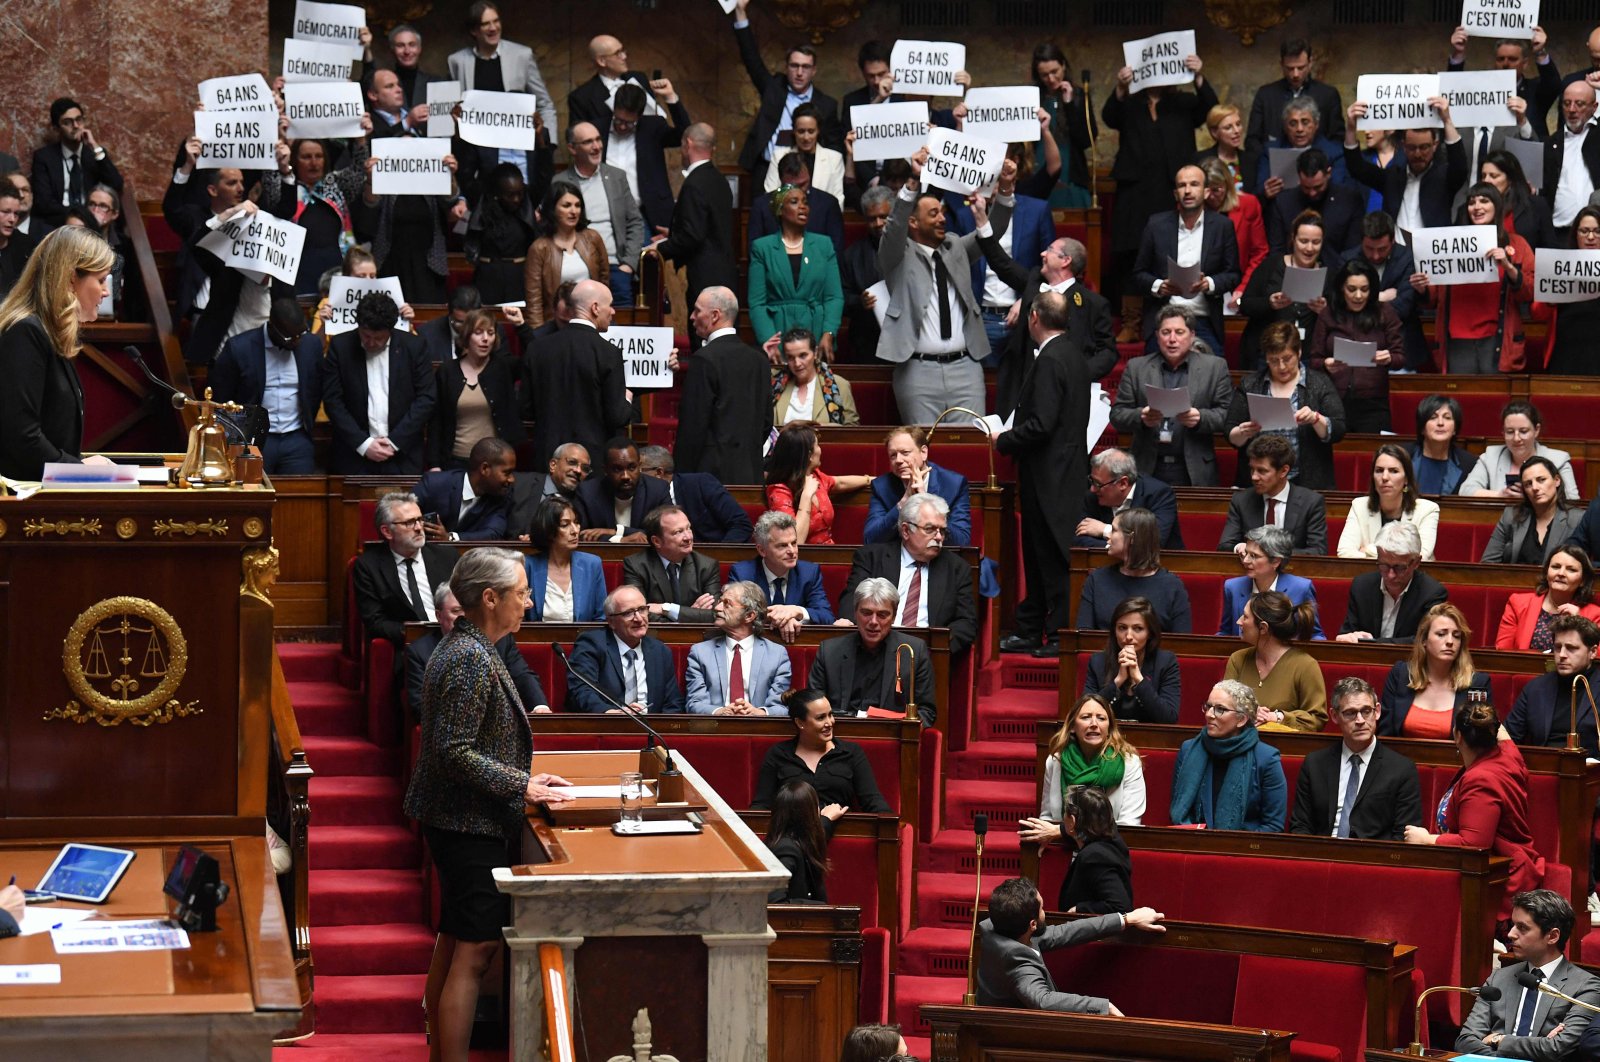 Members of Parliament of left-wing coalition NUPES (New People&#039;s Ecologic and Social Union) hold placards during the speech of France&#039;s Prime Minister Elisabeth Borne (center), as she confirms to force through pension law without parliament vote during a session on the government&#039;s pension reform at the lower house National Assembly, in Paris, France, March 16, 2023. (AFP Photo)